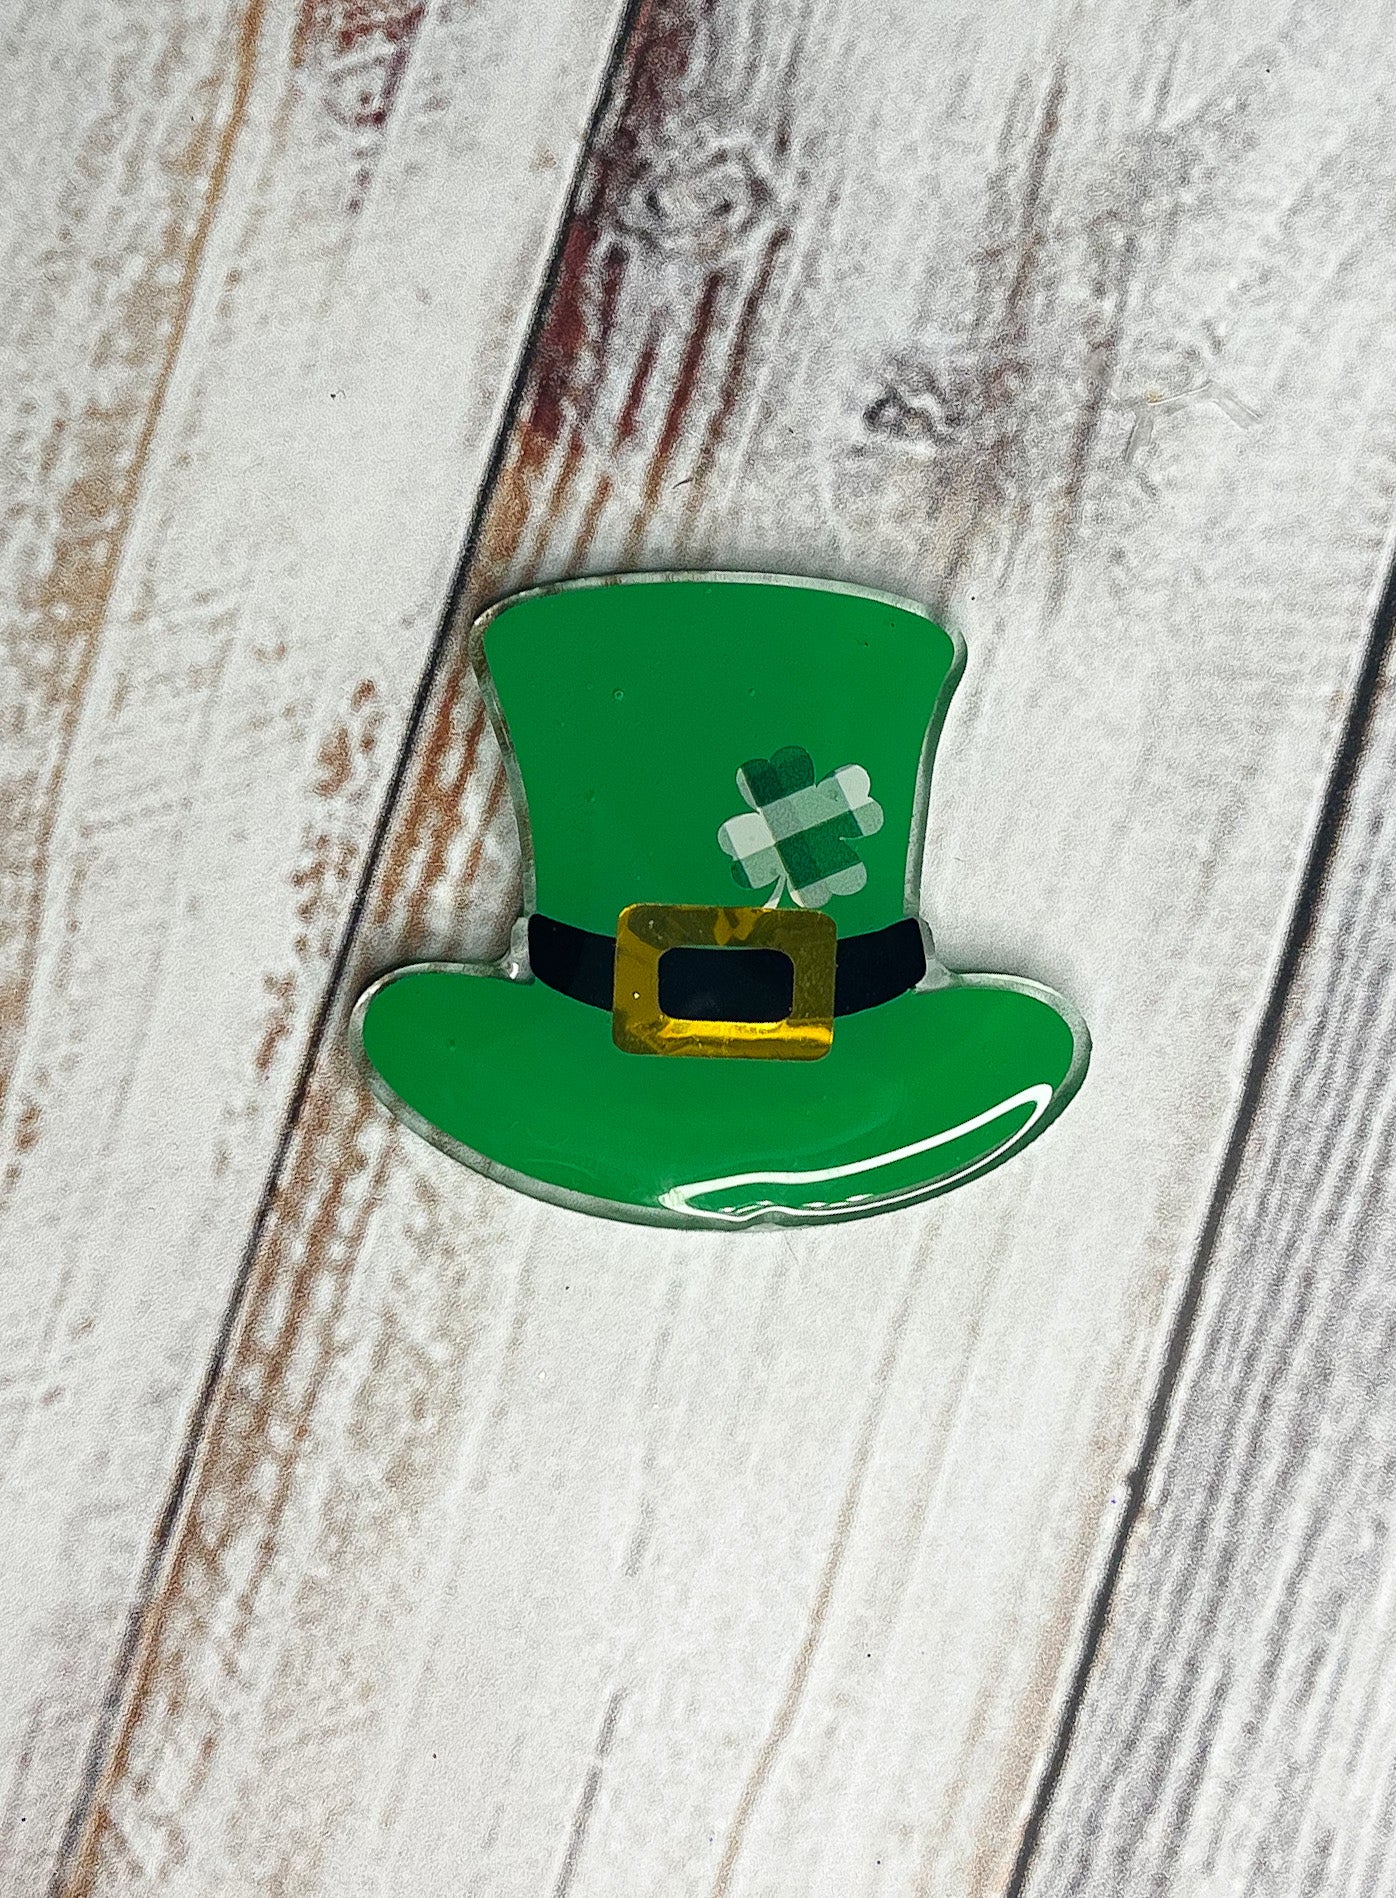 St. Patty’s Day Top Hat - Badge Reel Cover